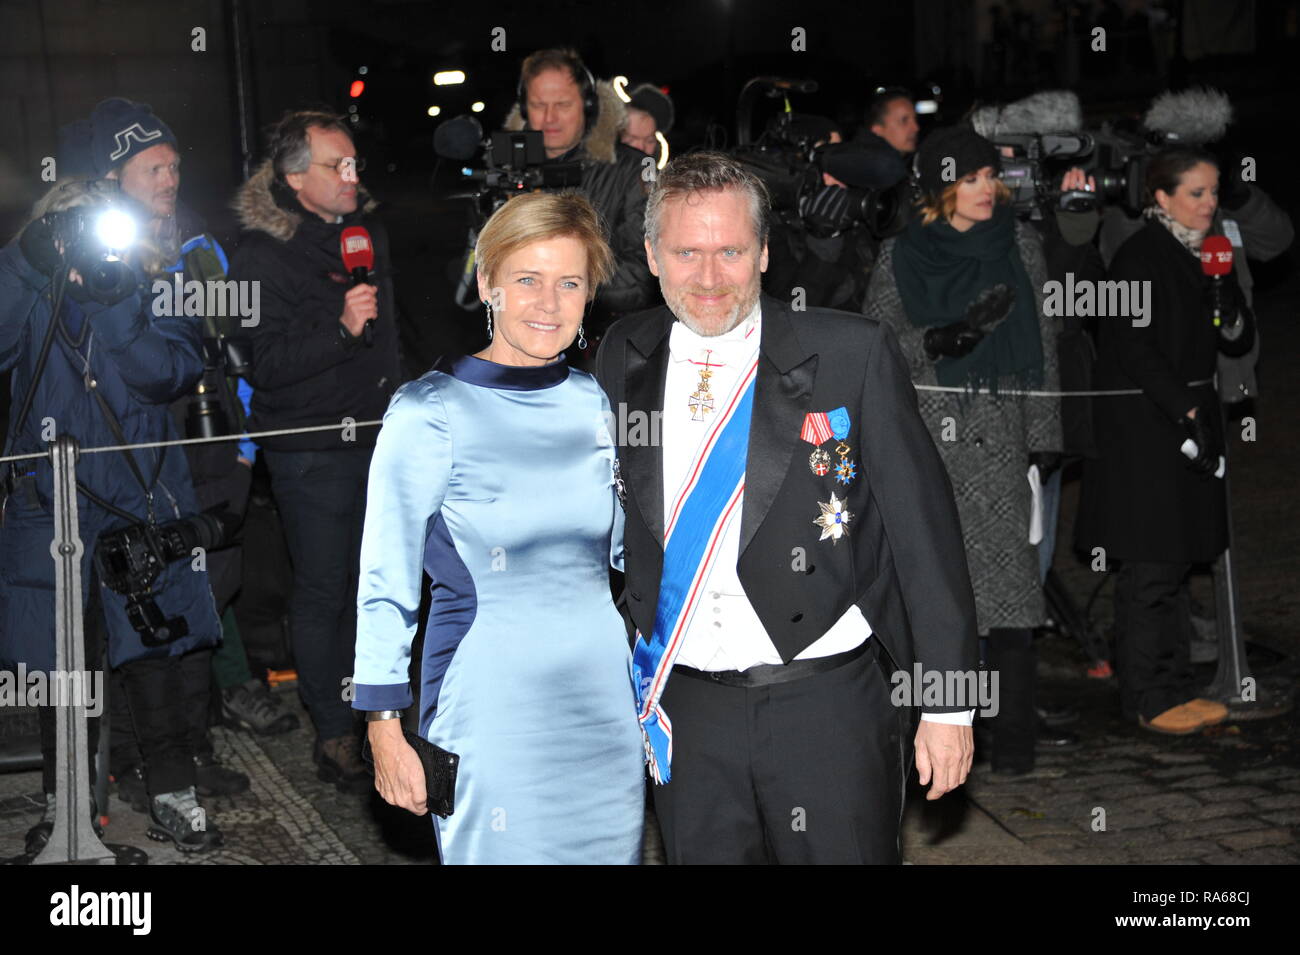 Copenhagen, Denmark. 1st January 2019. The Danish Minister for Culture Mette Bock (left) and his younger brother The Minister for Foreign Affairs of Denmark Anders Samuelsen (right) arrives to attend HM Queen Margrethe II’s annual New Year’s levee and banquet reception at Christian VII's Palace, Amalienborg Palace, Copenhagen on 1st January 2019. Credit: HFG/Alamy Live News Stock Photo